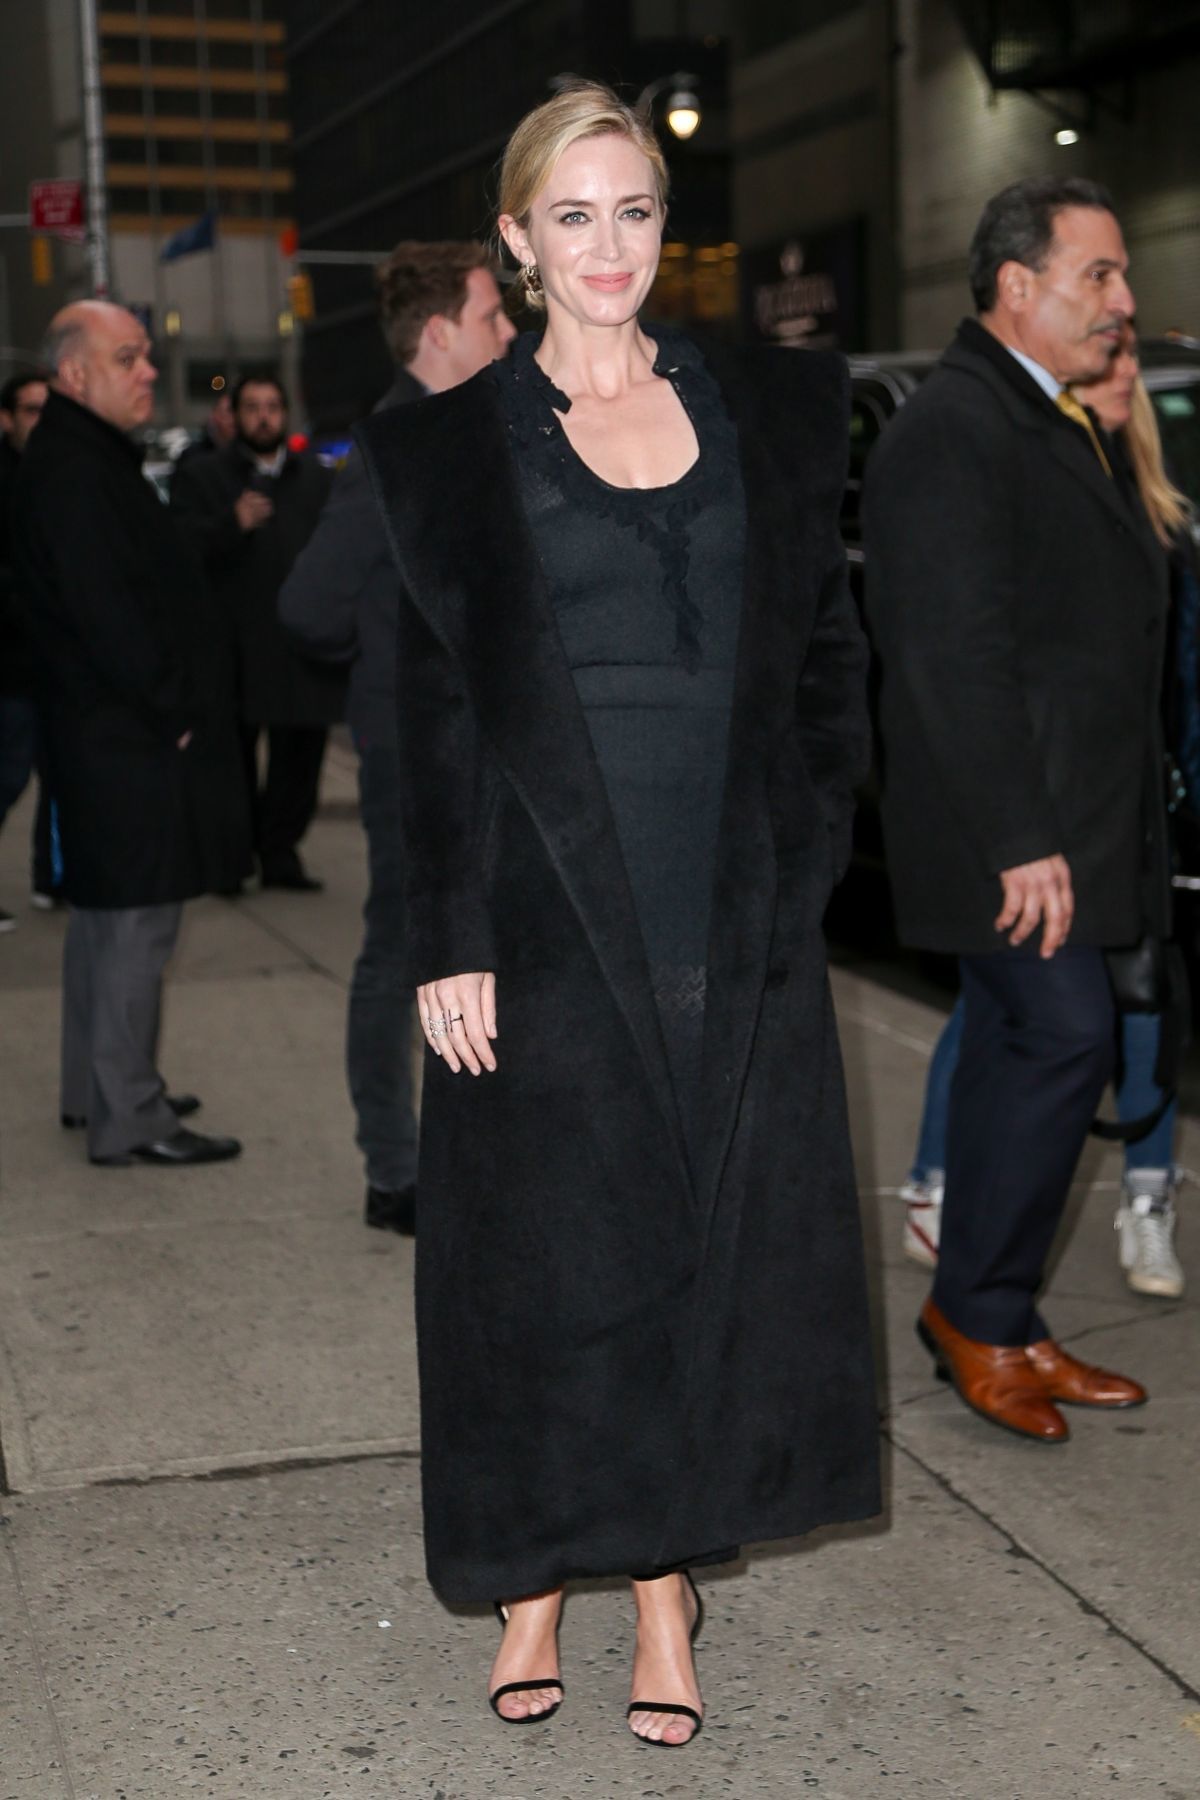 emily-blunt-arriving-at-the-late-show-with-stephen-colbert-in-nyc-32918-8.jpeg